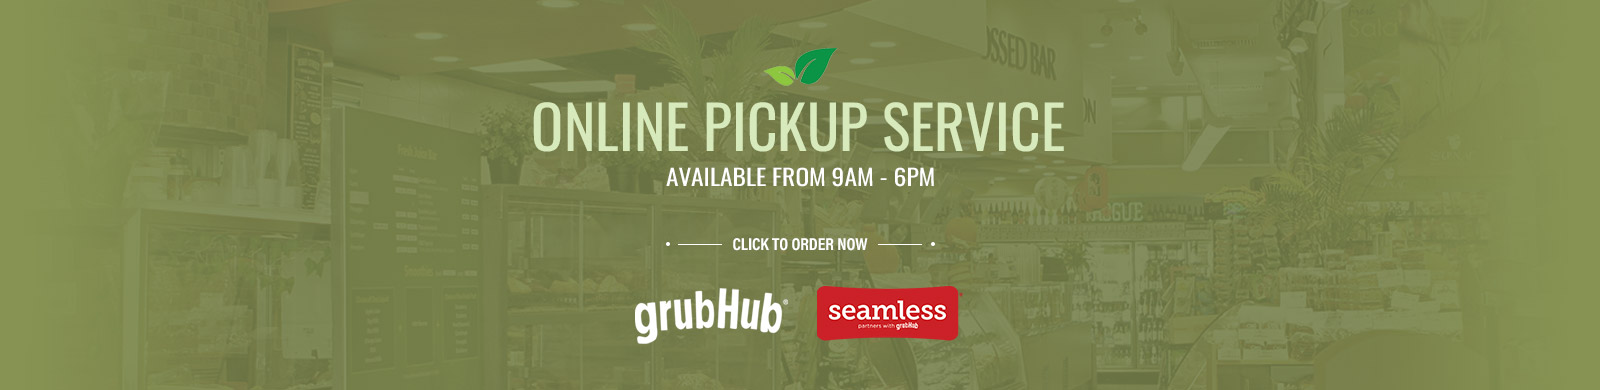 Online Pickup Service Available from 9AM - 8PM